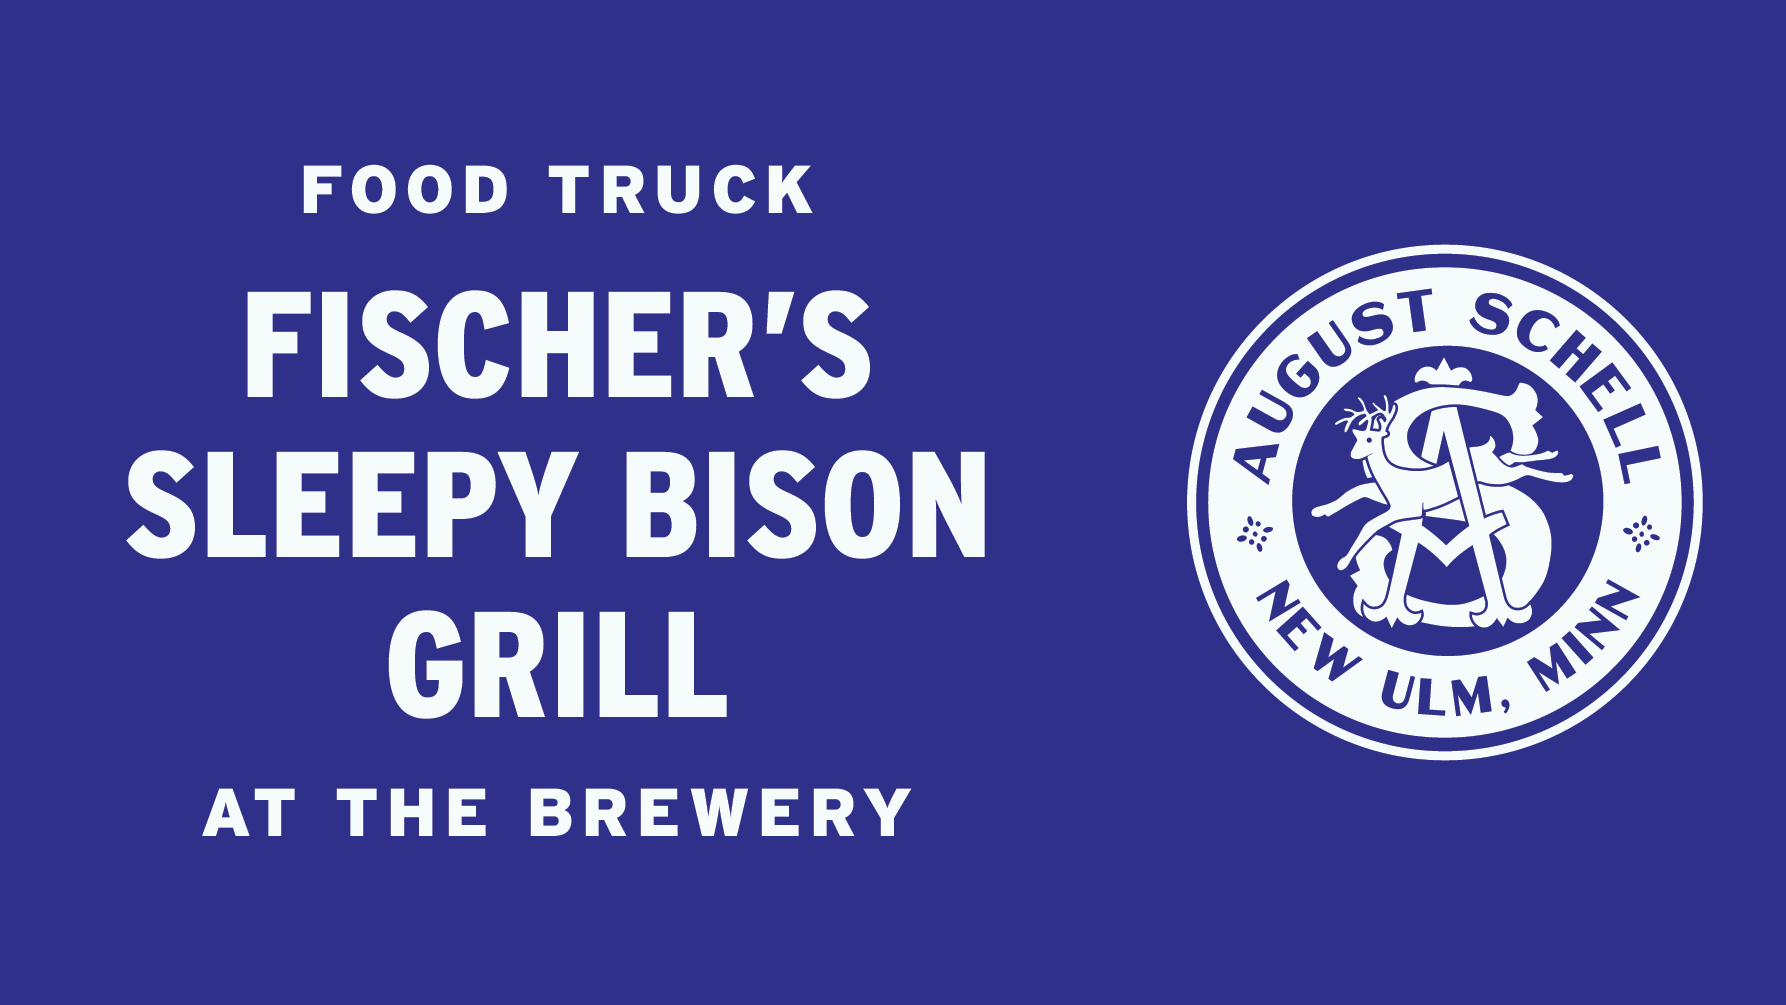 Blue rectangular background. Text says: Food Truck Fischer's Sleepy Bison Grill at the Brewery. August Schell Brewing Company circle crest is to the right of the text.